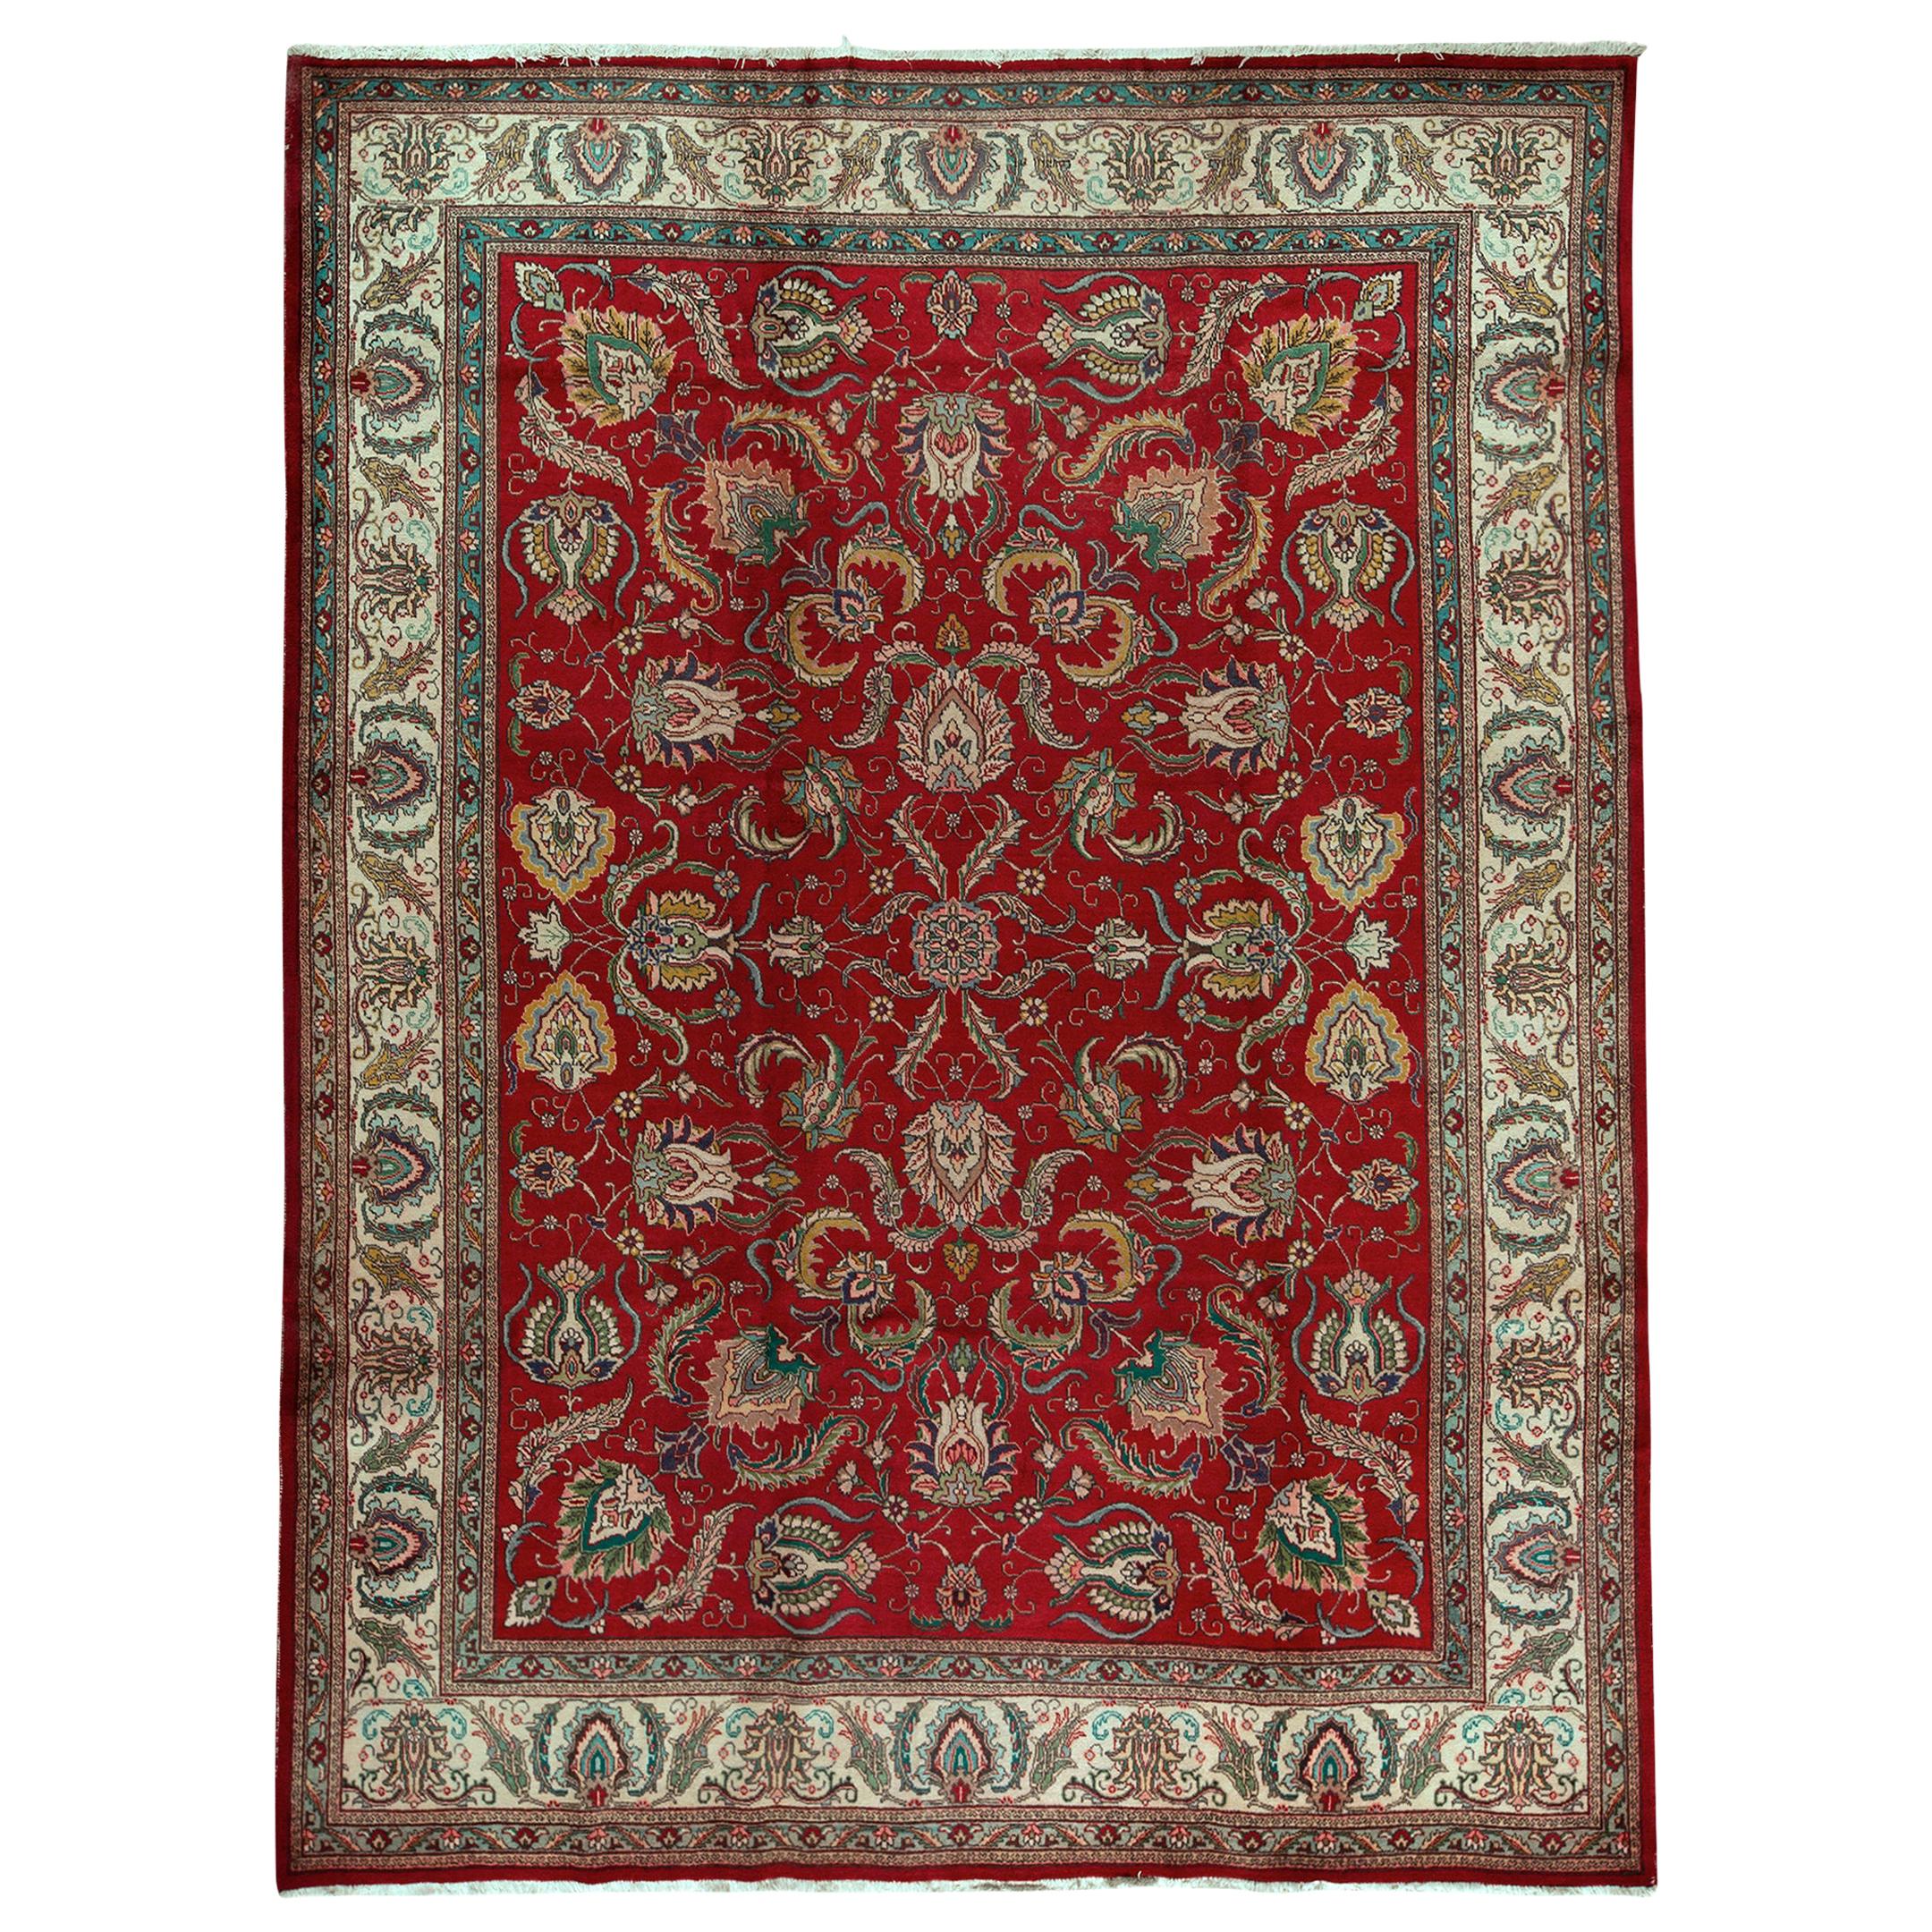   Antique Persian Fine Traditional Handwoven Luxury Wool Red / Ivory Rug